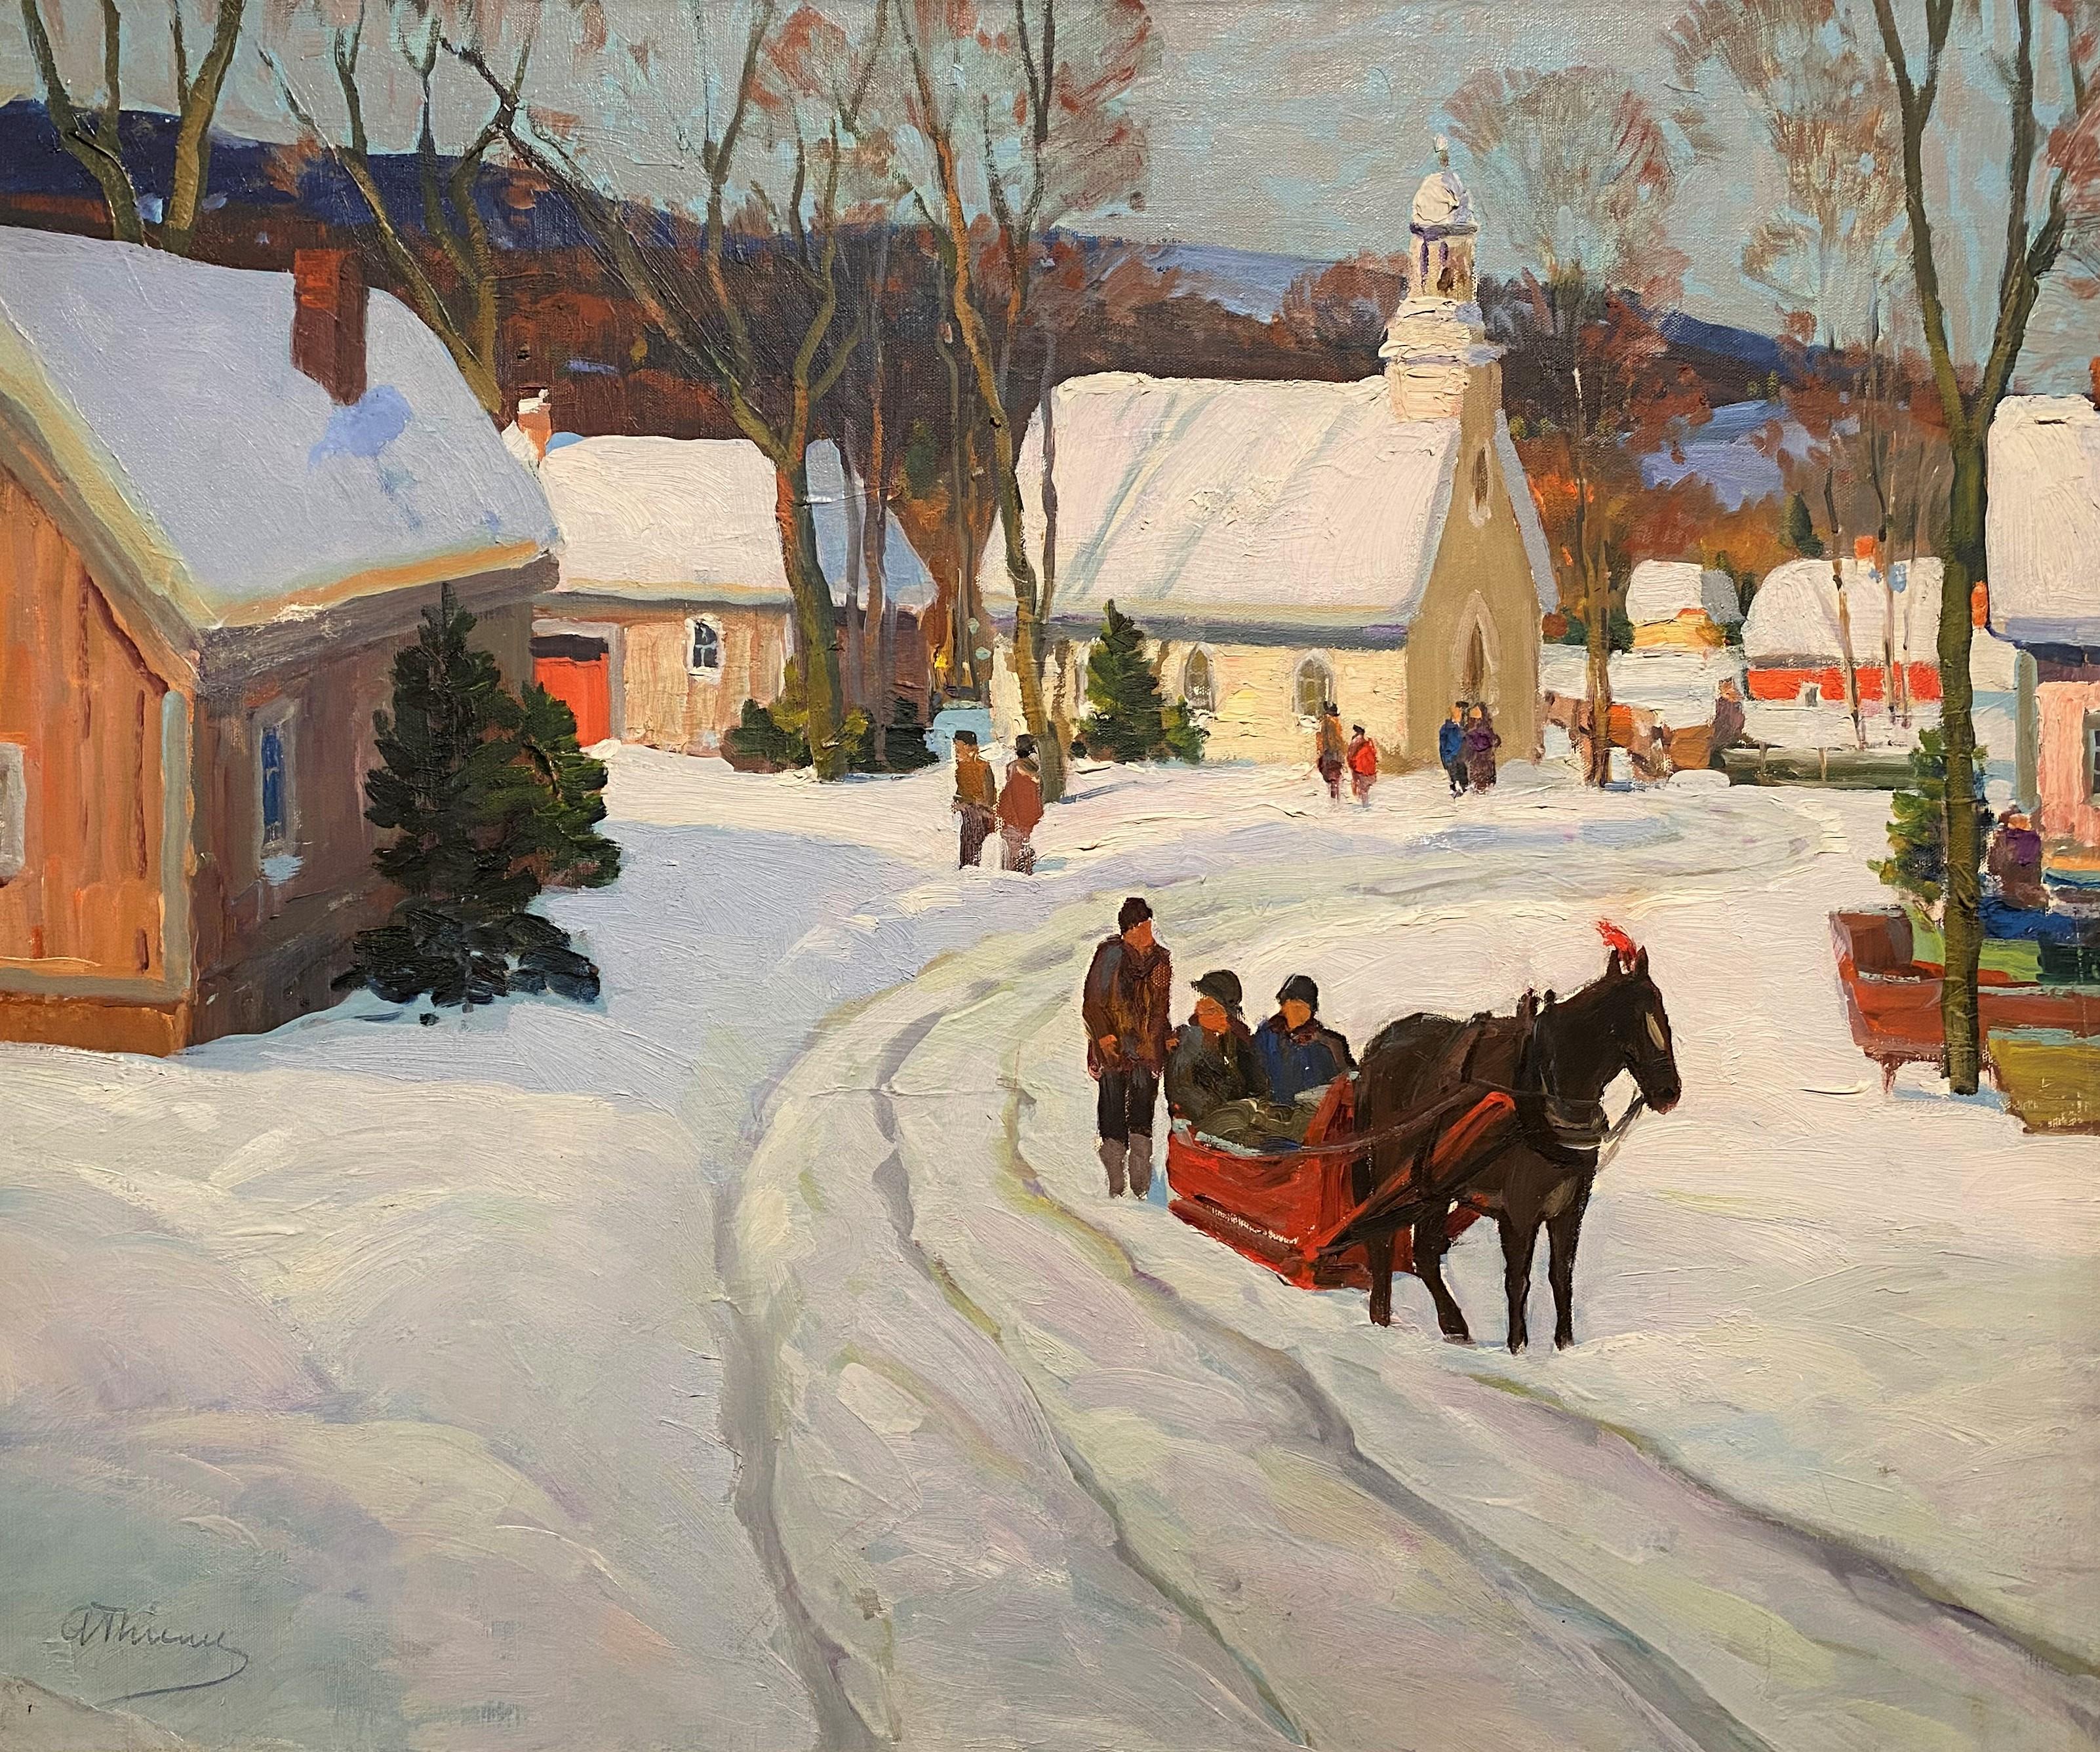 Mountain Village in Winter - Painting by Anthony Thieme